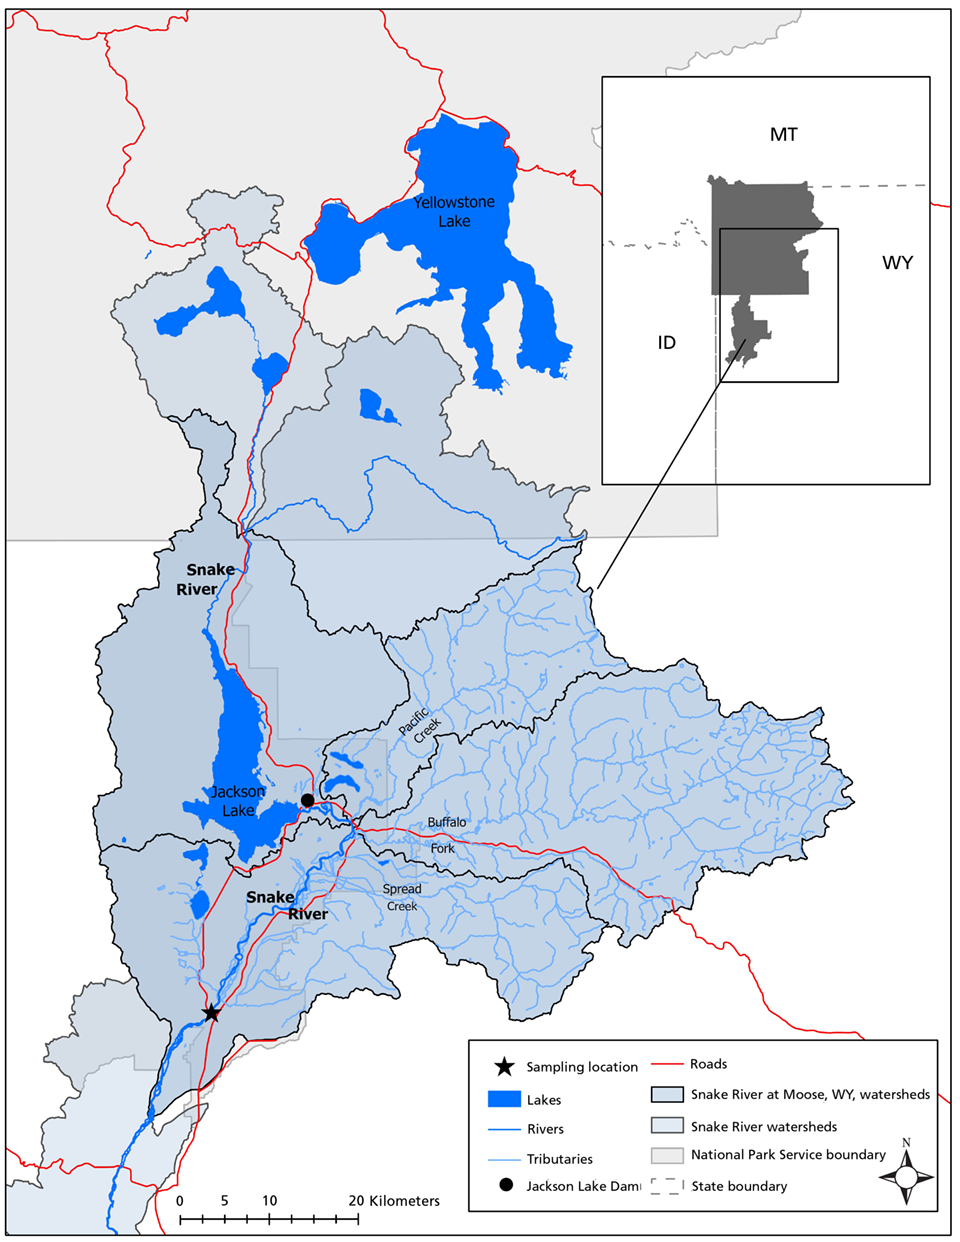 Map of the watersheds of the Snake River segment at Moose, WY